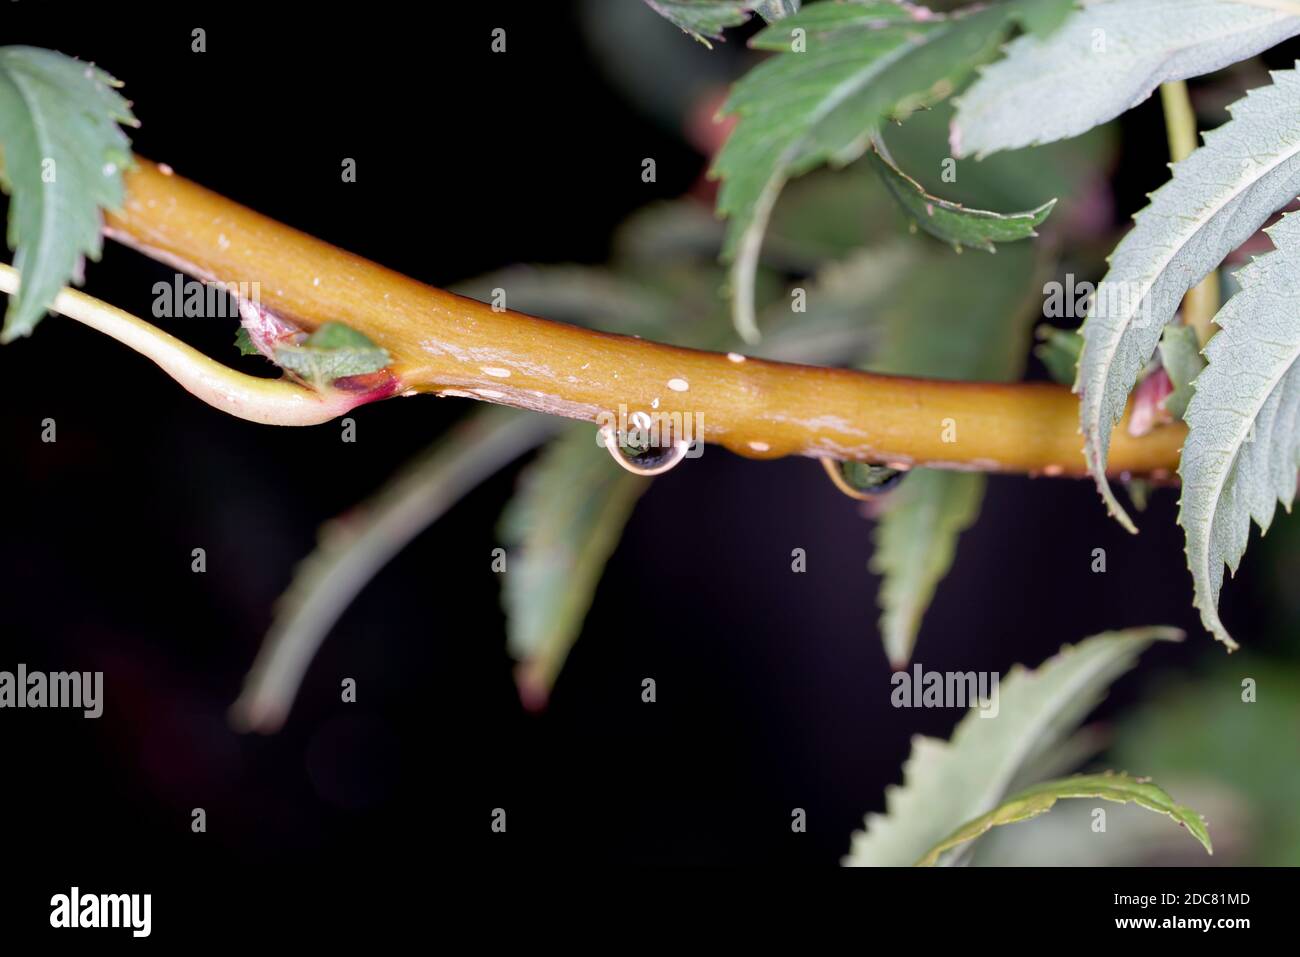 A closeup of water drops from the rain on a branch of the plant on a dark background Stock Photo